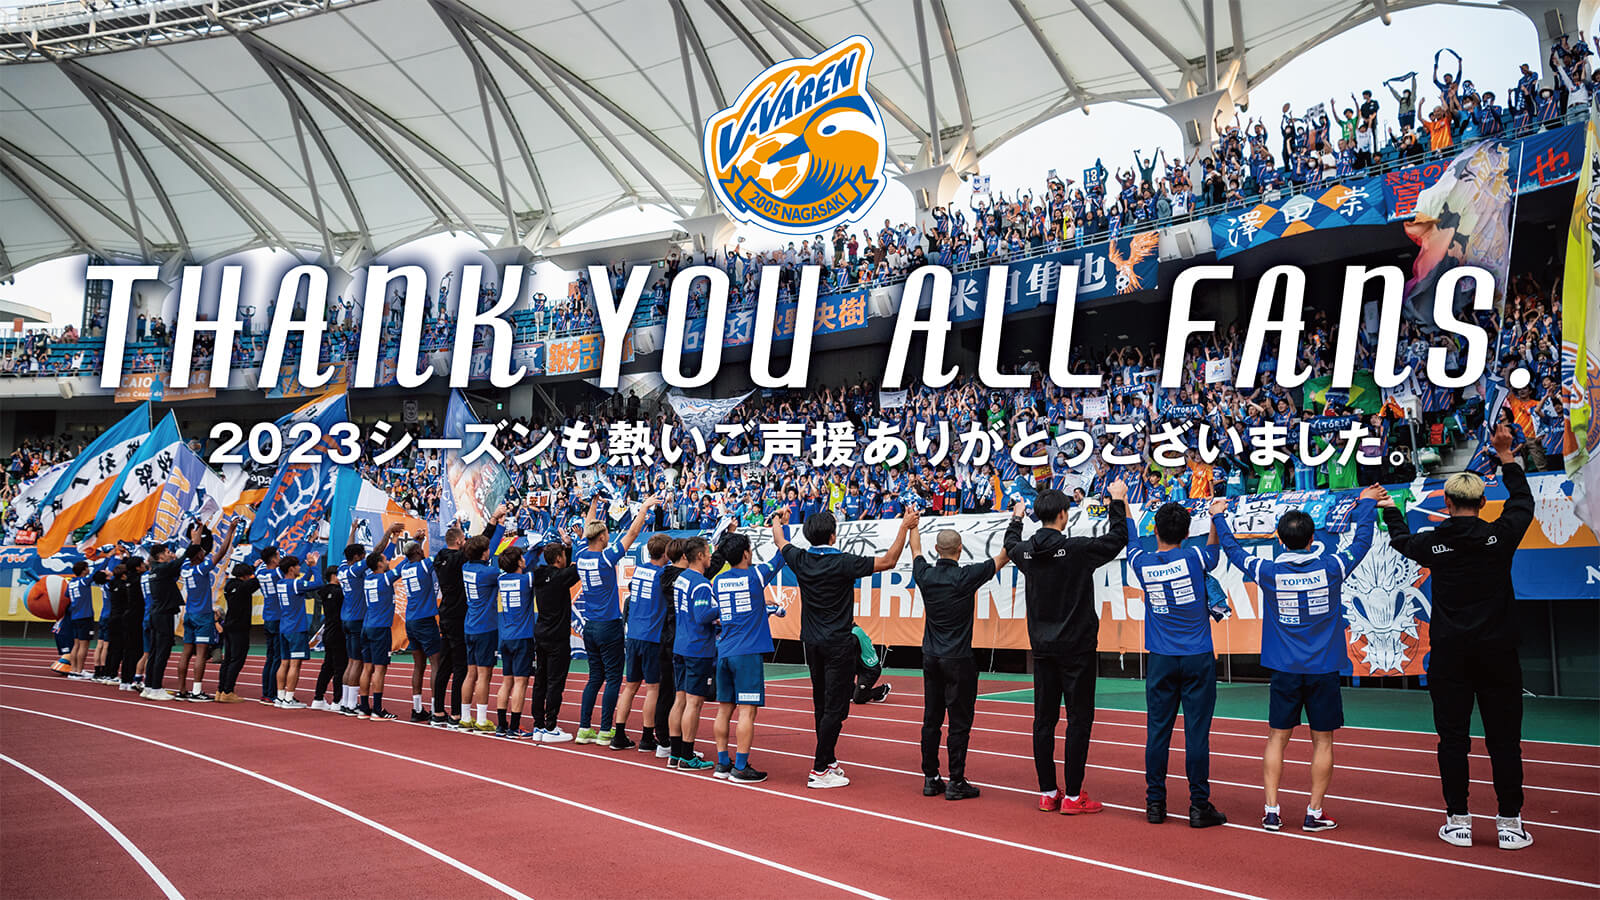 Thank you all fans. 2023シーズンも熱いご声援ありがとうございました。